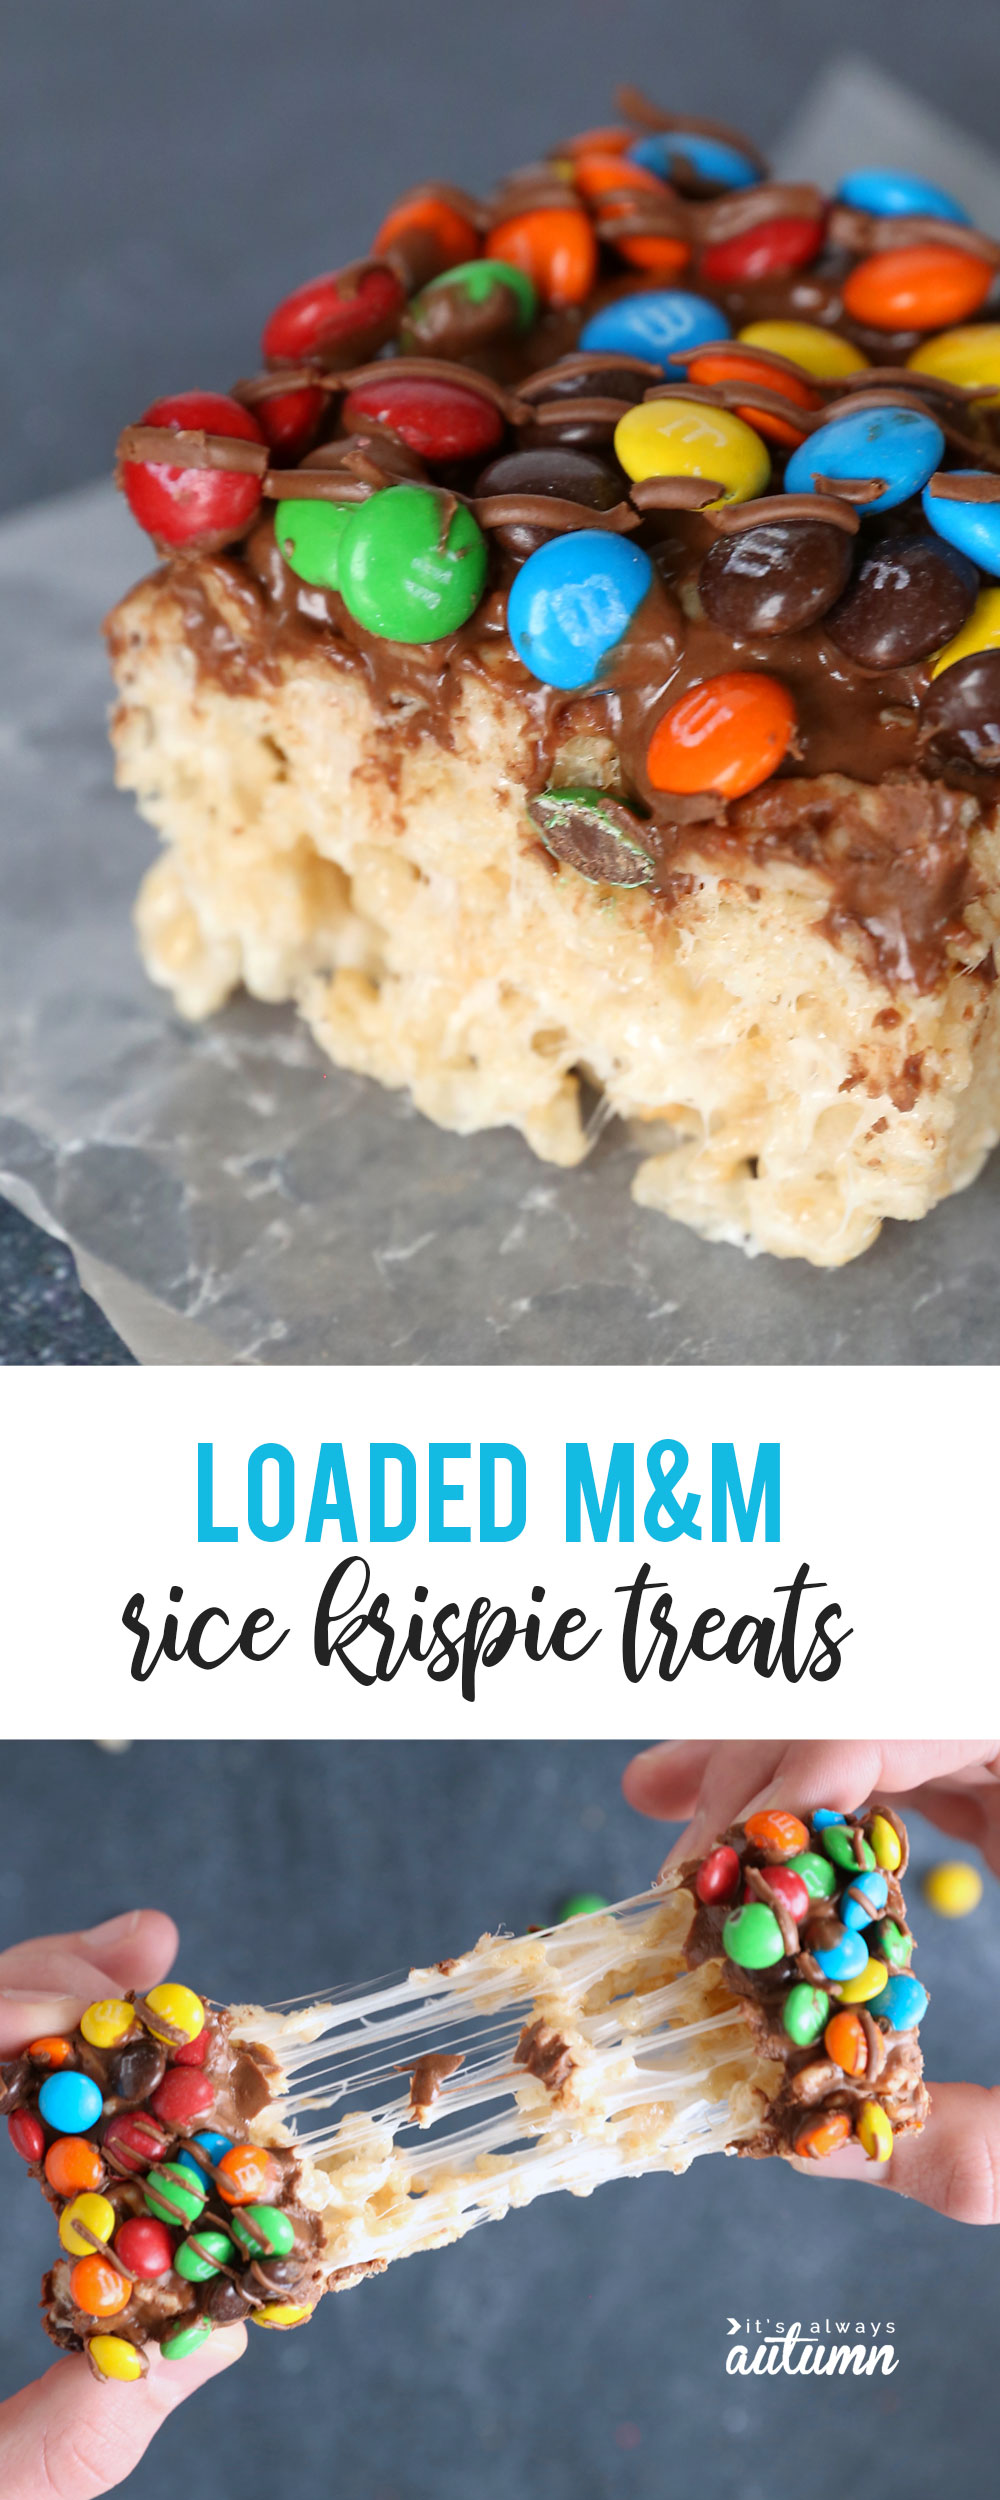 Rice Krispie treats covered in mini M&Ms and chocolate